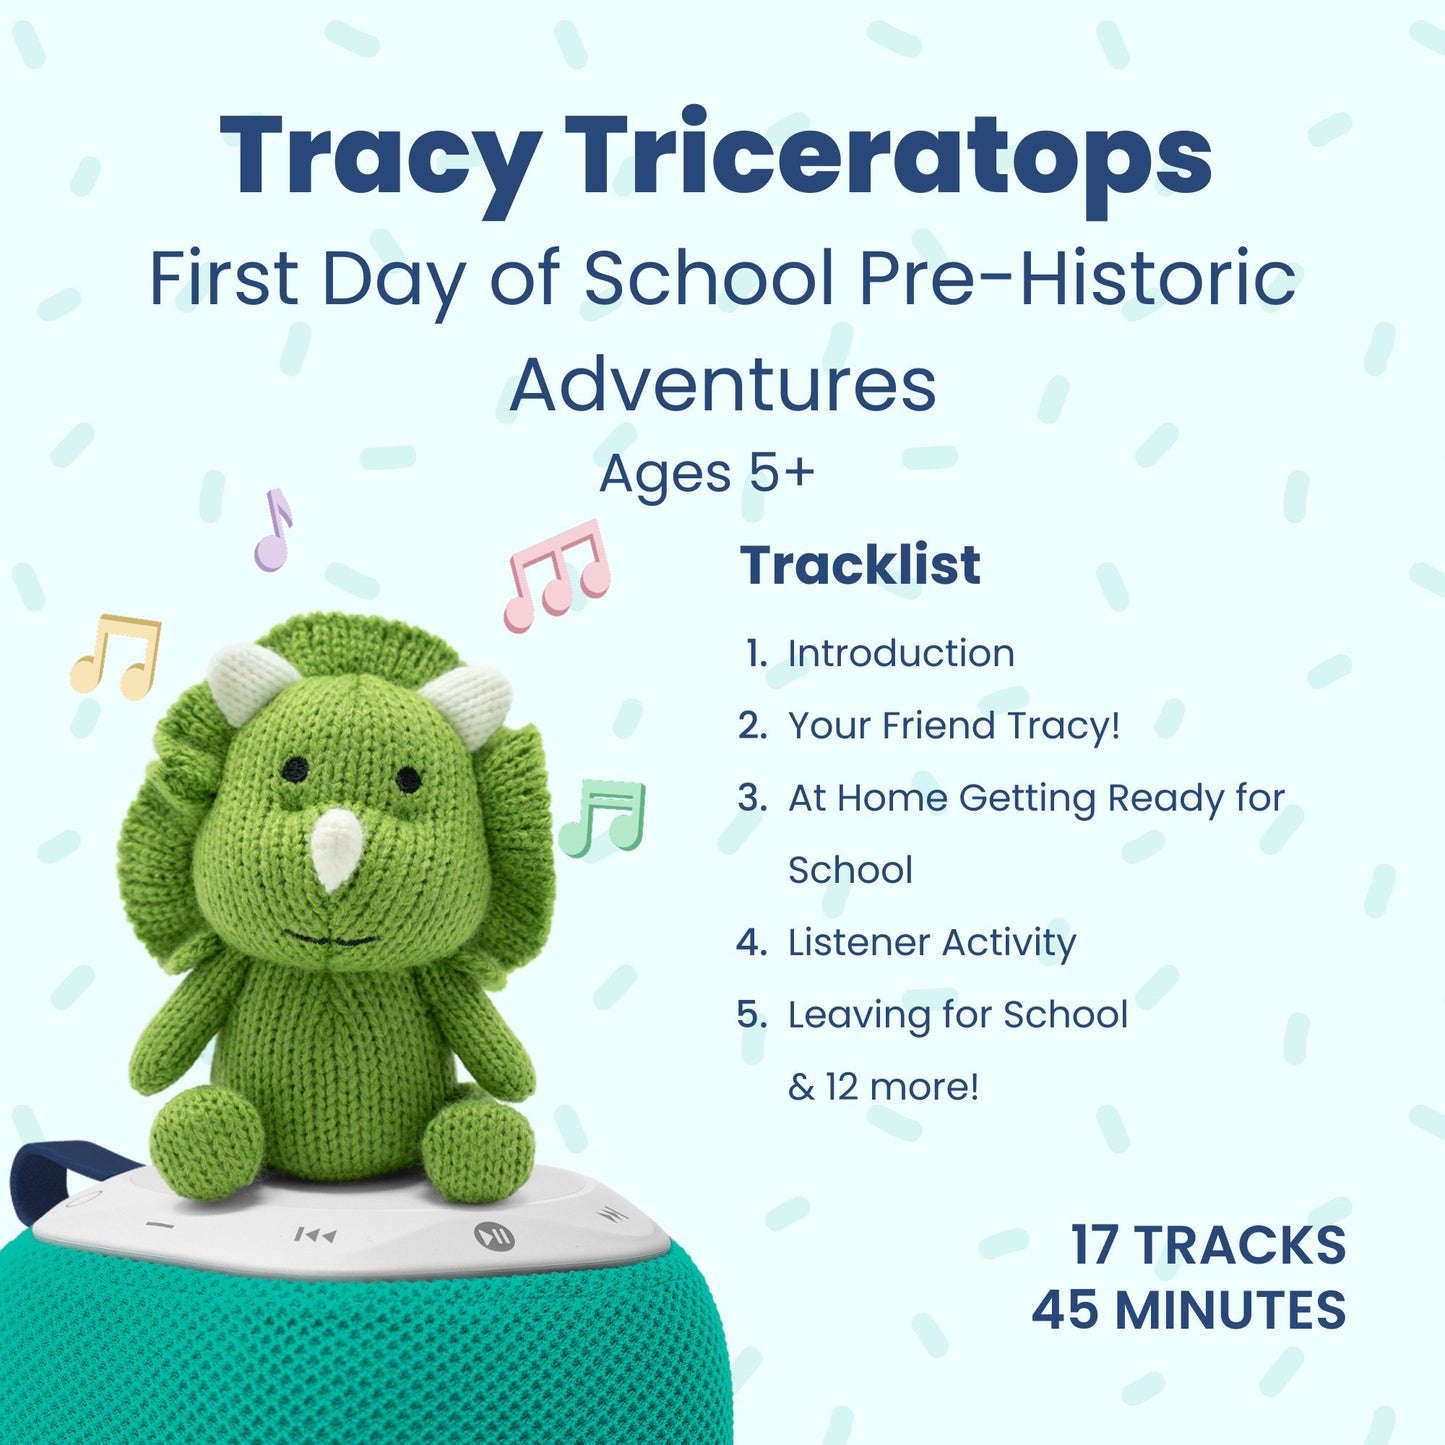 Tracy Triceratops